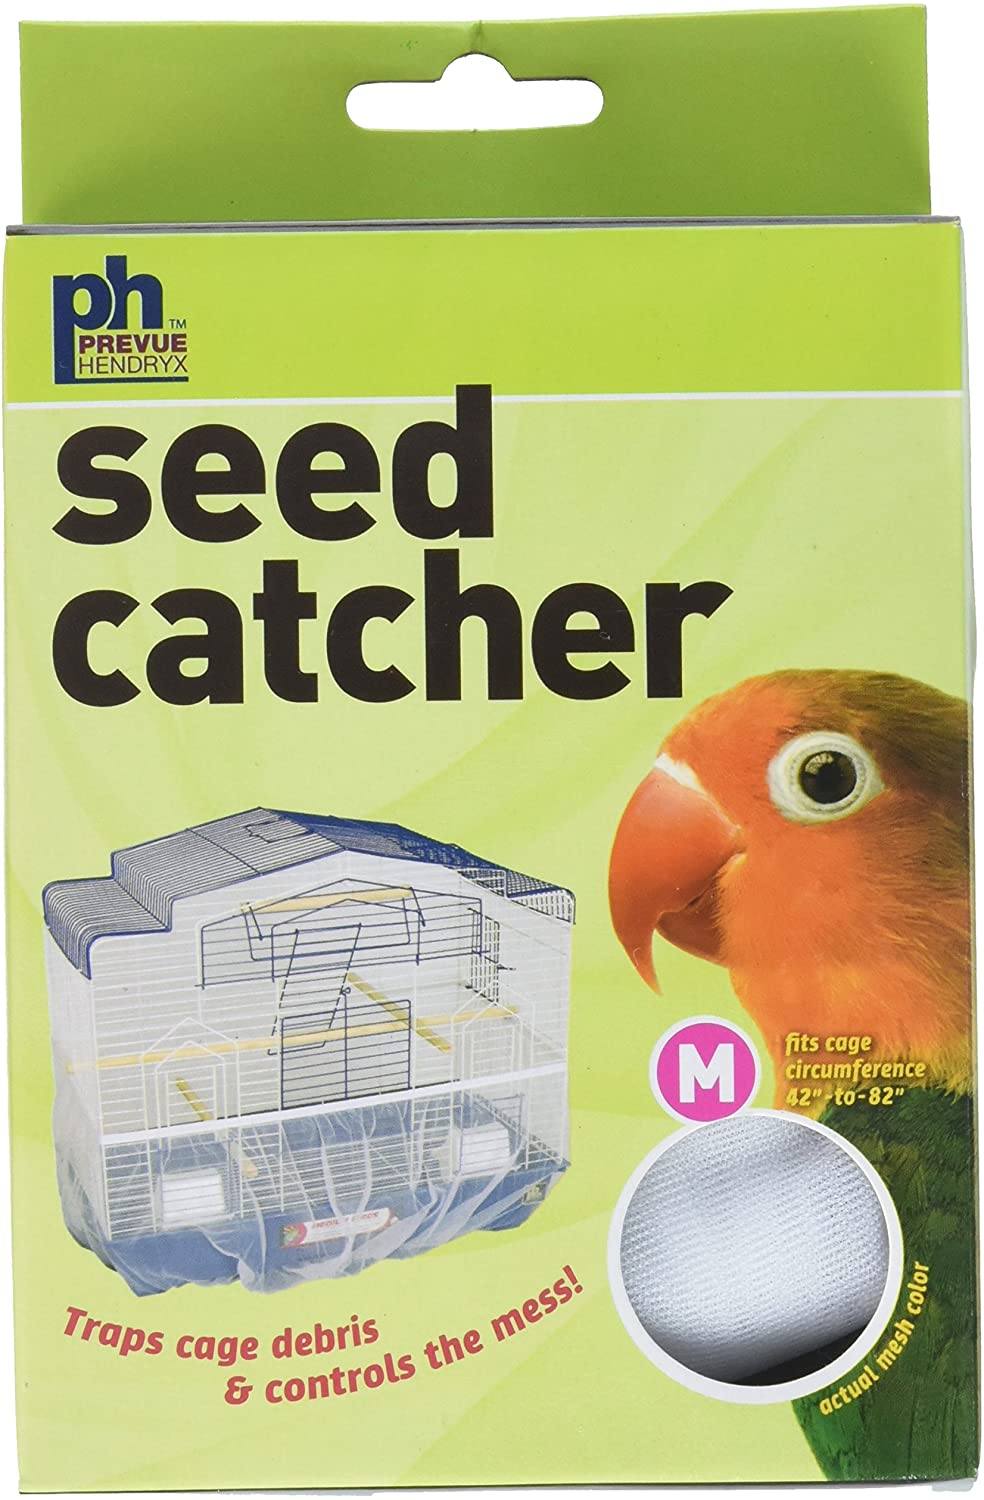 Prevue Hendryx Mesh Seed Catcher - Assorted Colors - 42" to 82"  